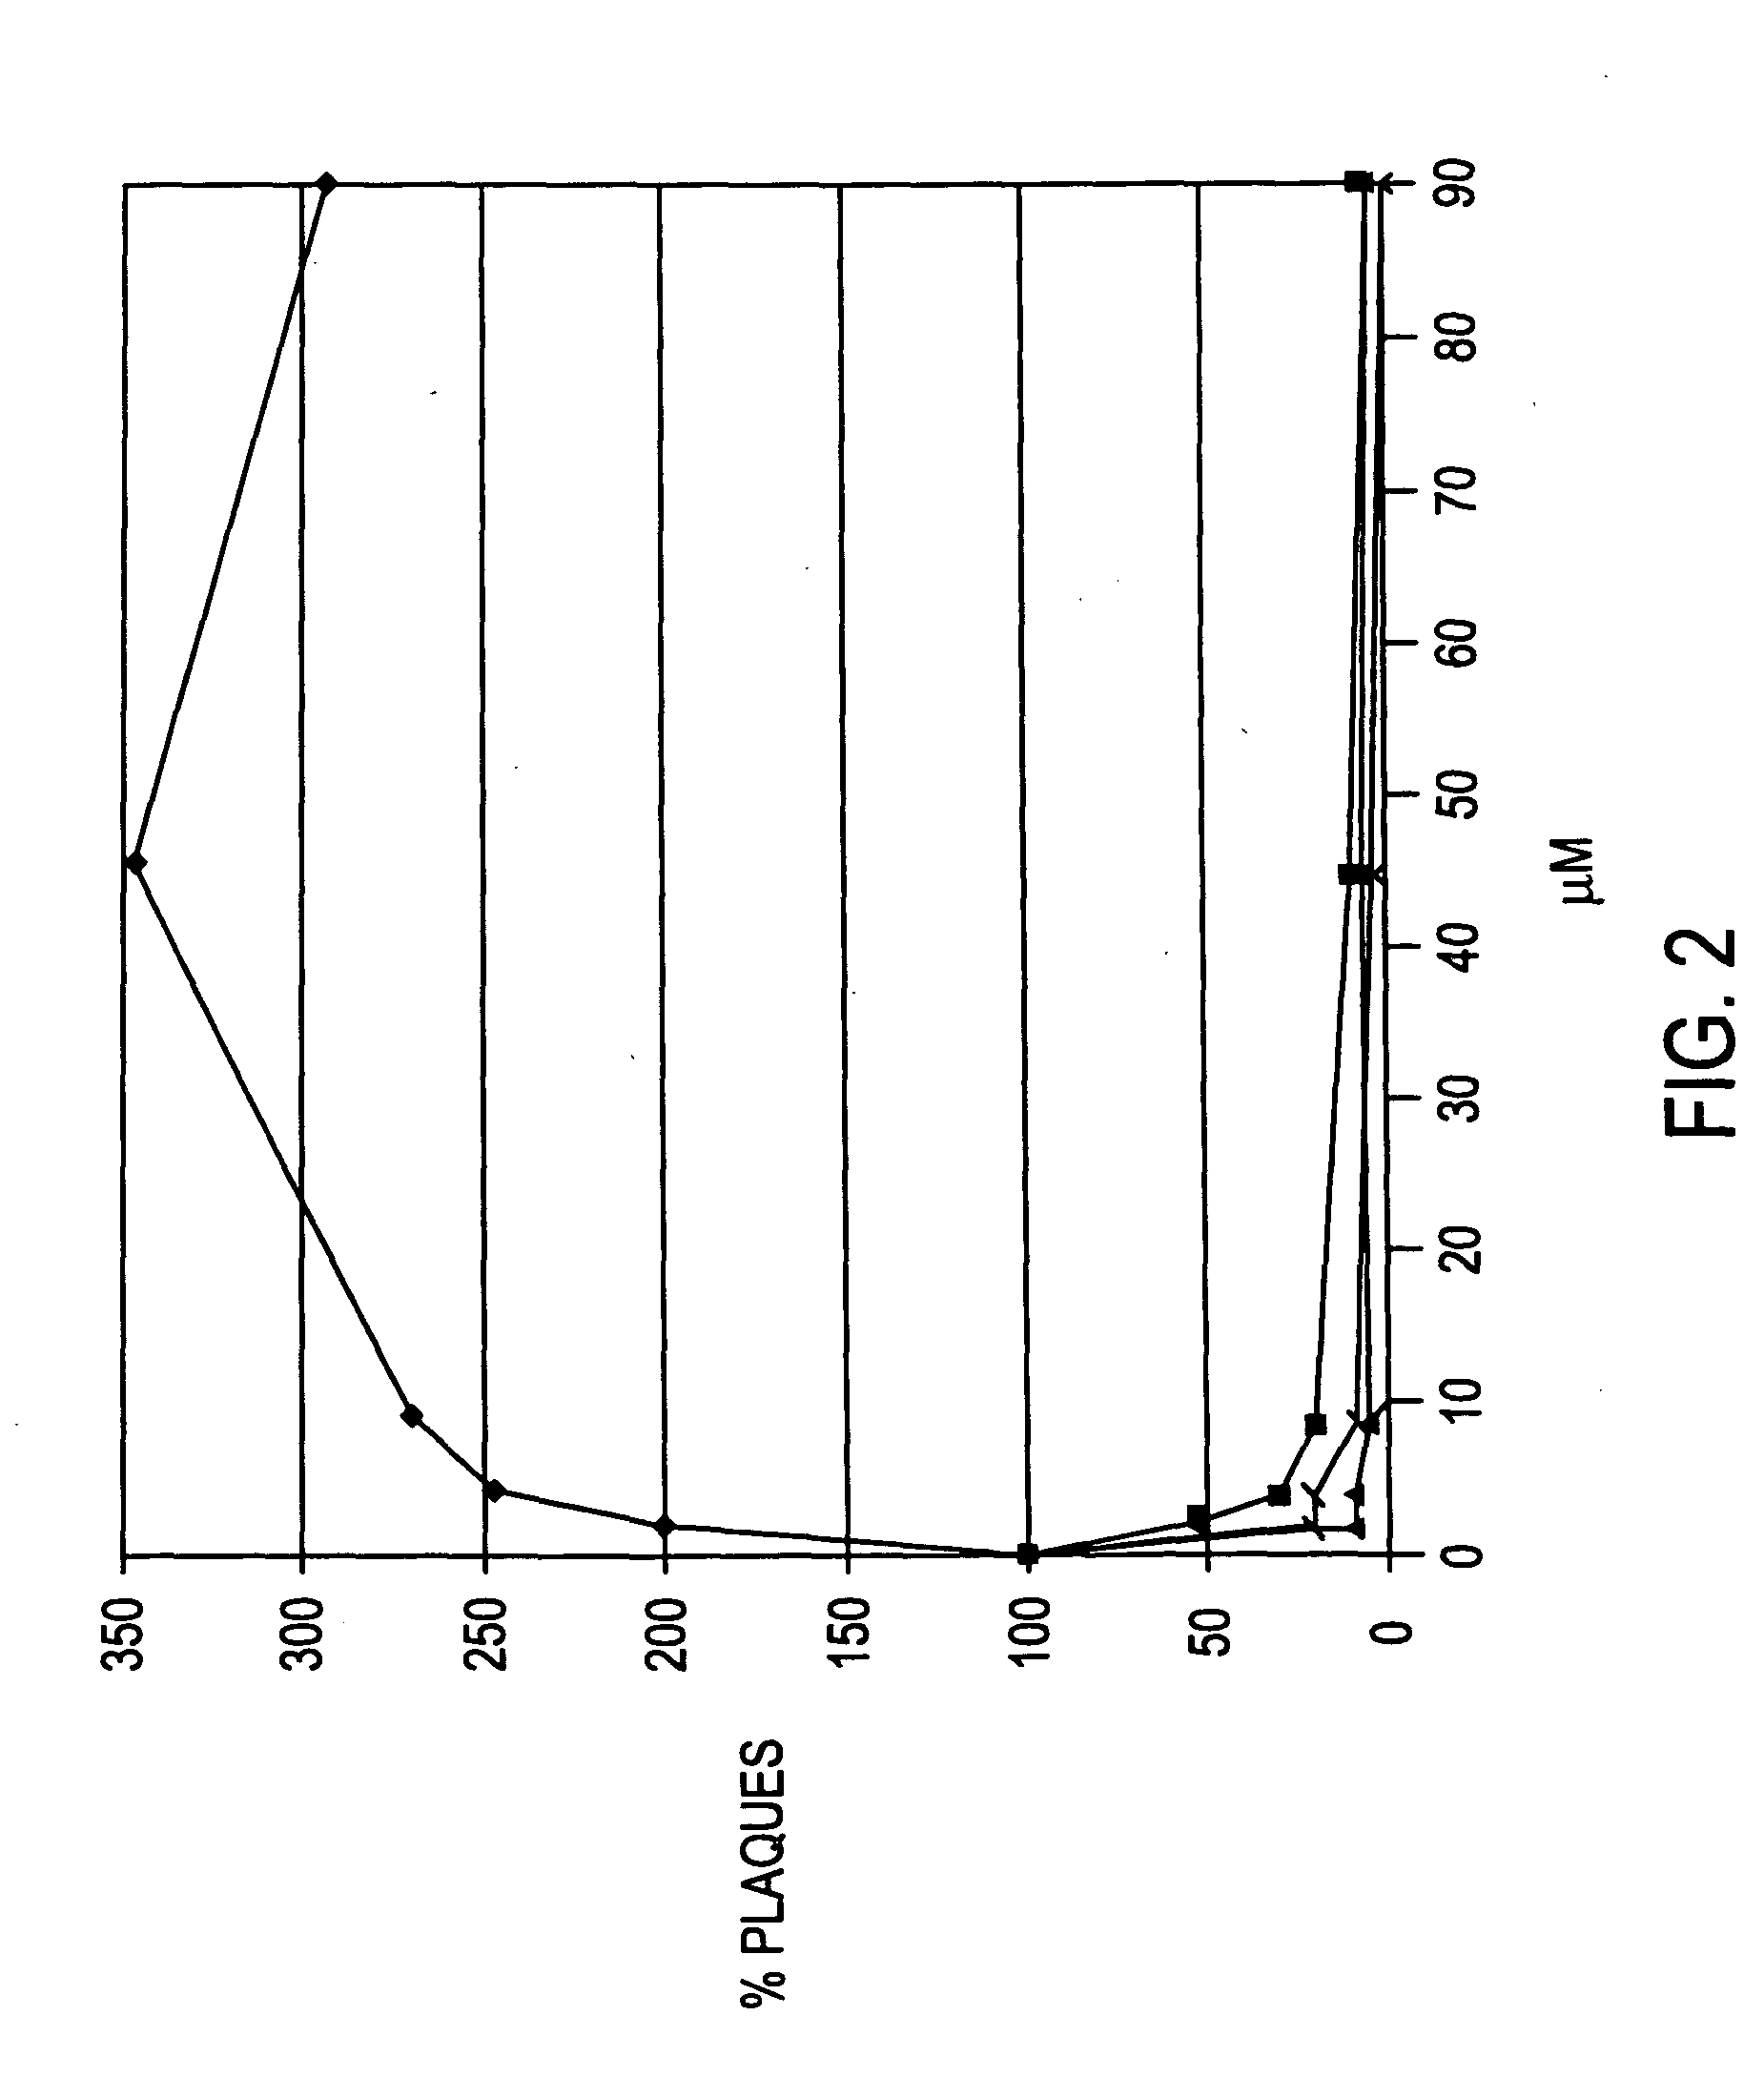 Long chain N-alkyl compounds and oxa-derivatives thereof